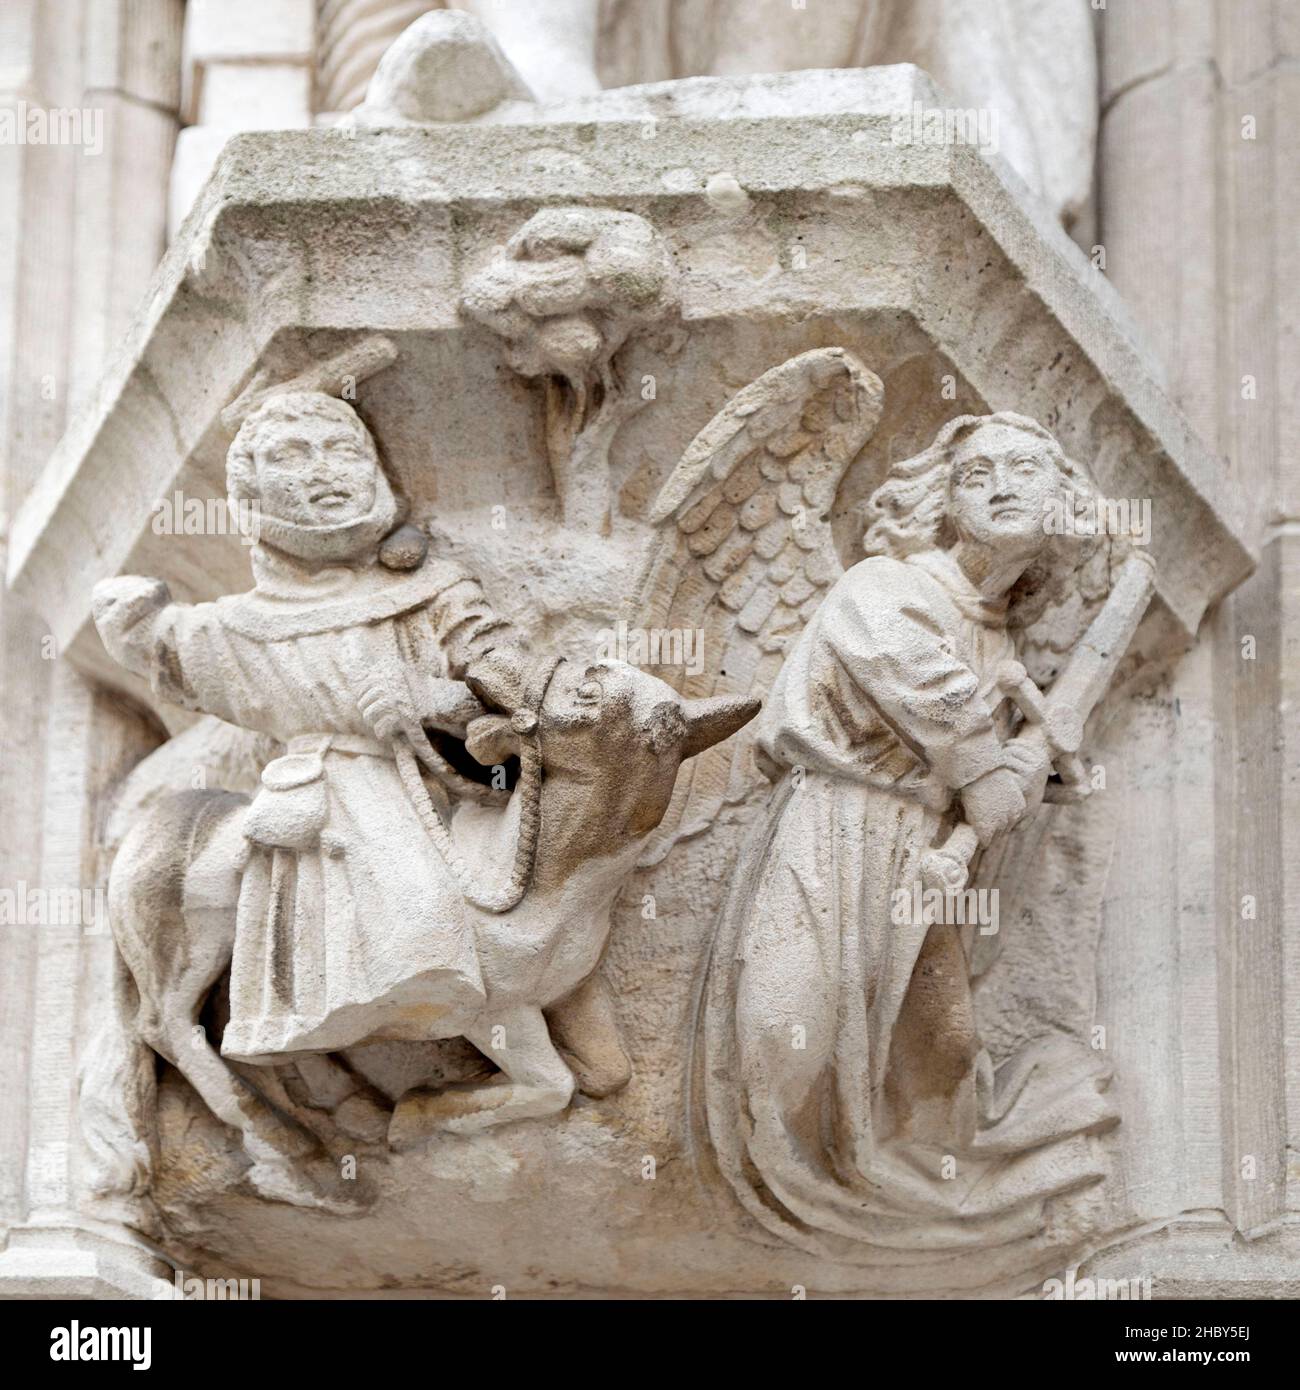 Biblical sculpture on the facade of the city hall (stadhuis) in Leuven, Belgium. The Gothic building dates from the 15th century. Stock Photo